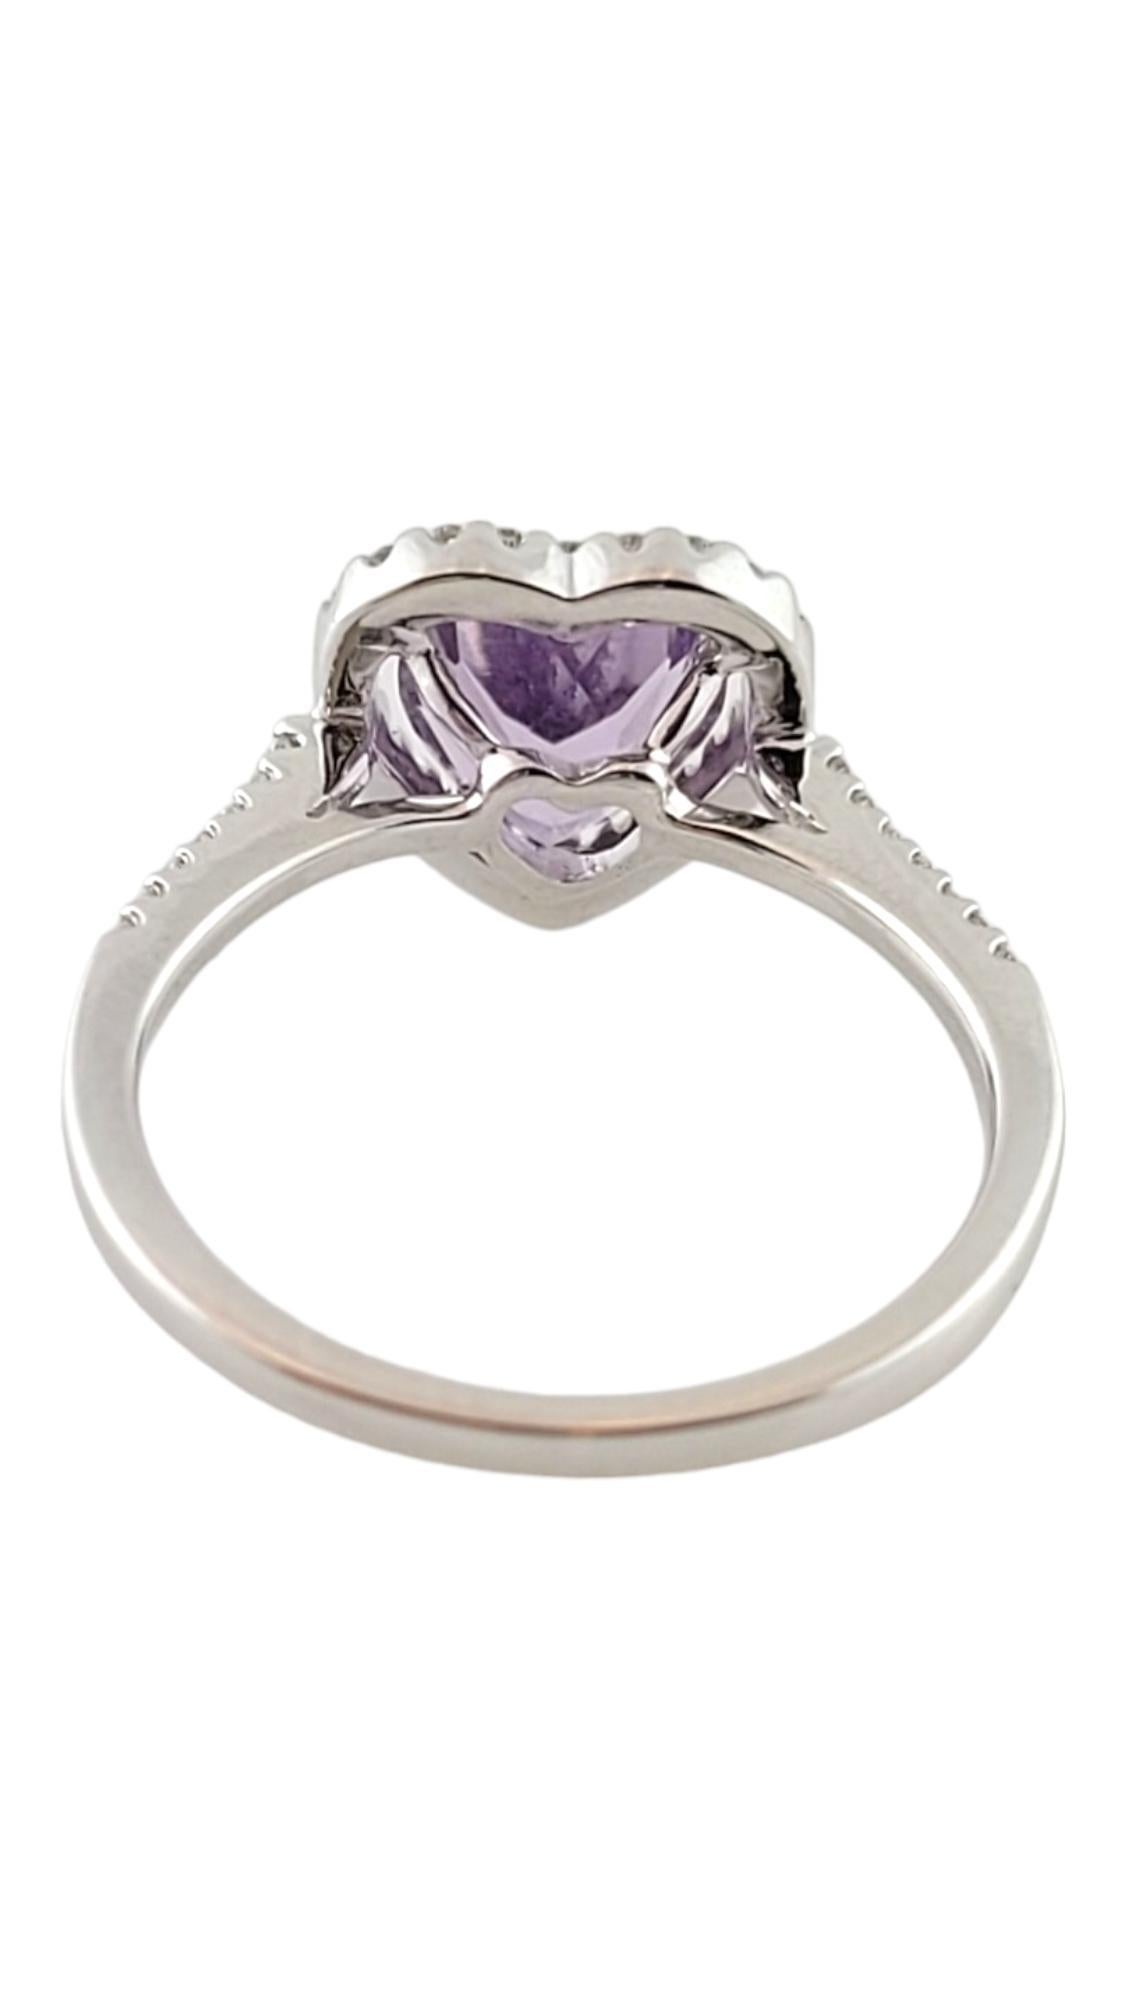 18K White Gold Diamond & Amethyst Heart Halo Ring Size 6.5 #16289 In Good Condition For Sale In Washington Depot, CT